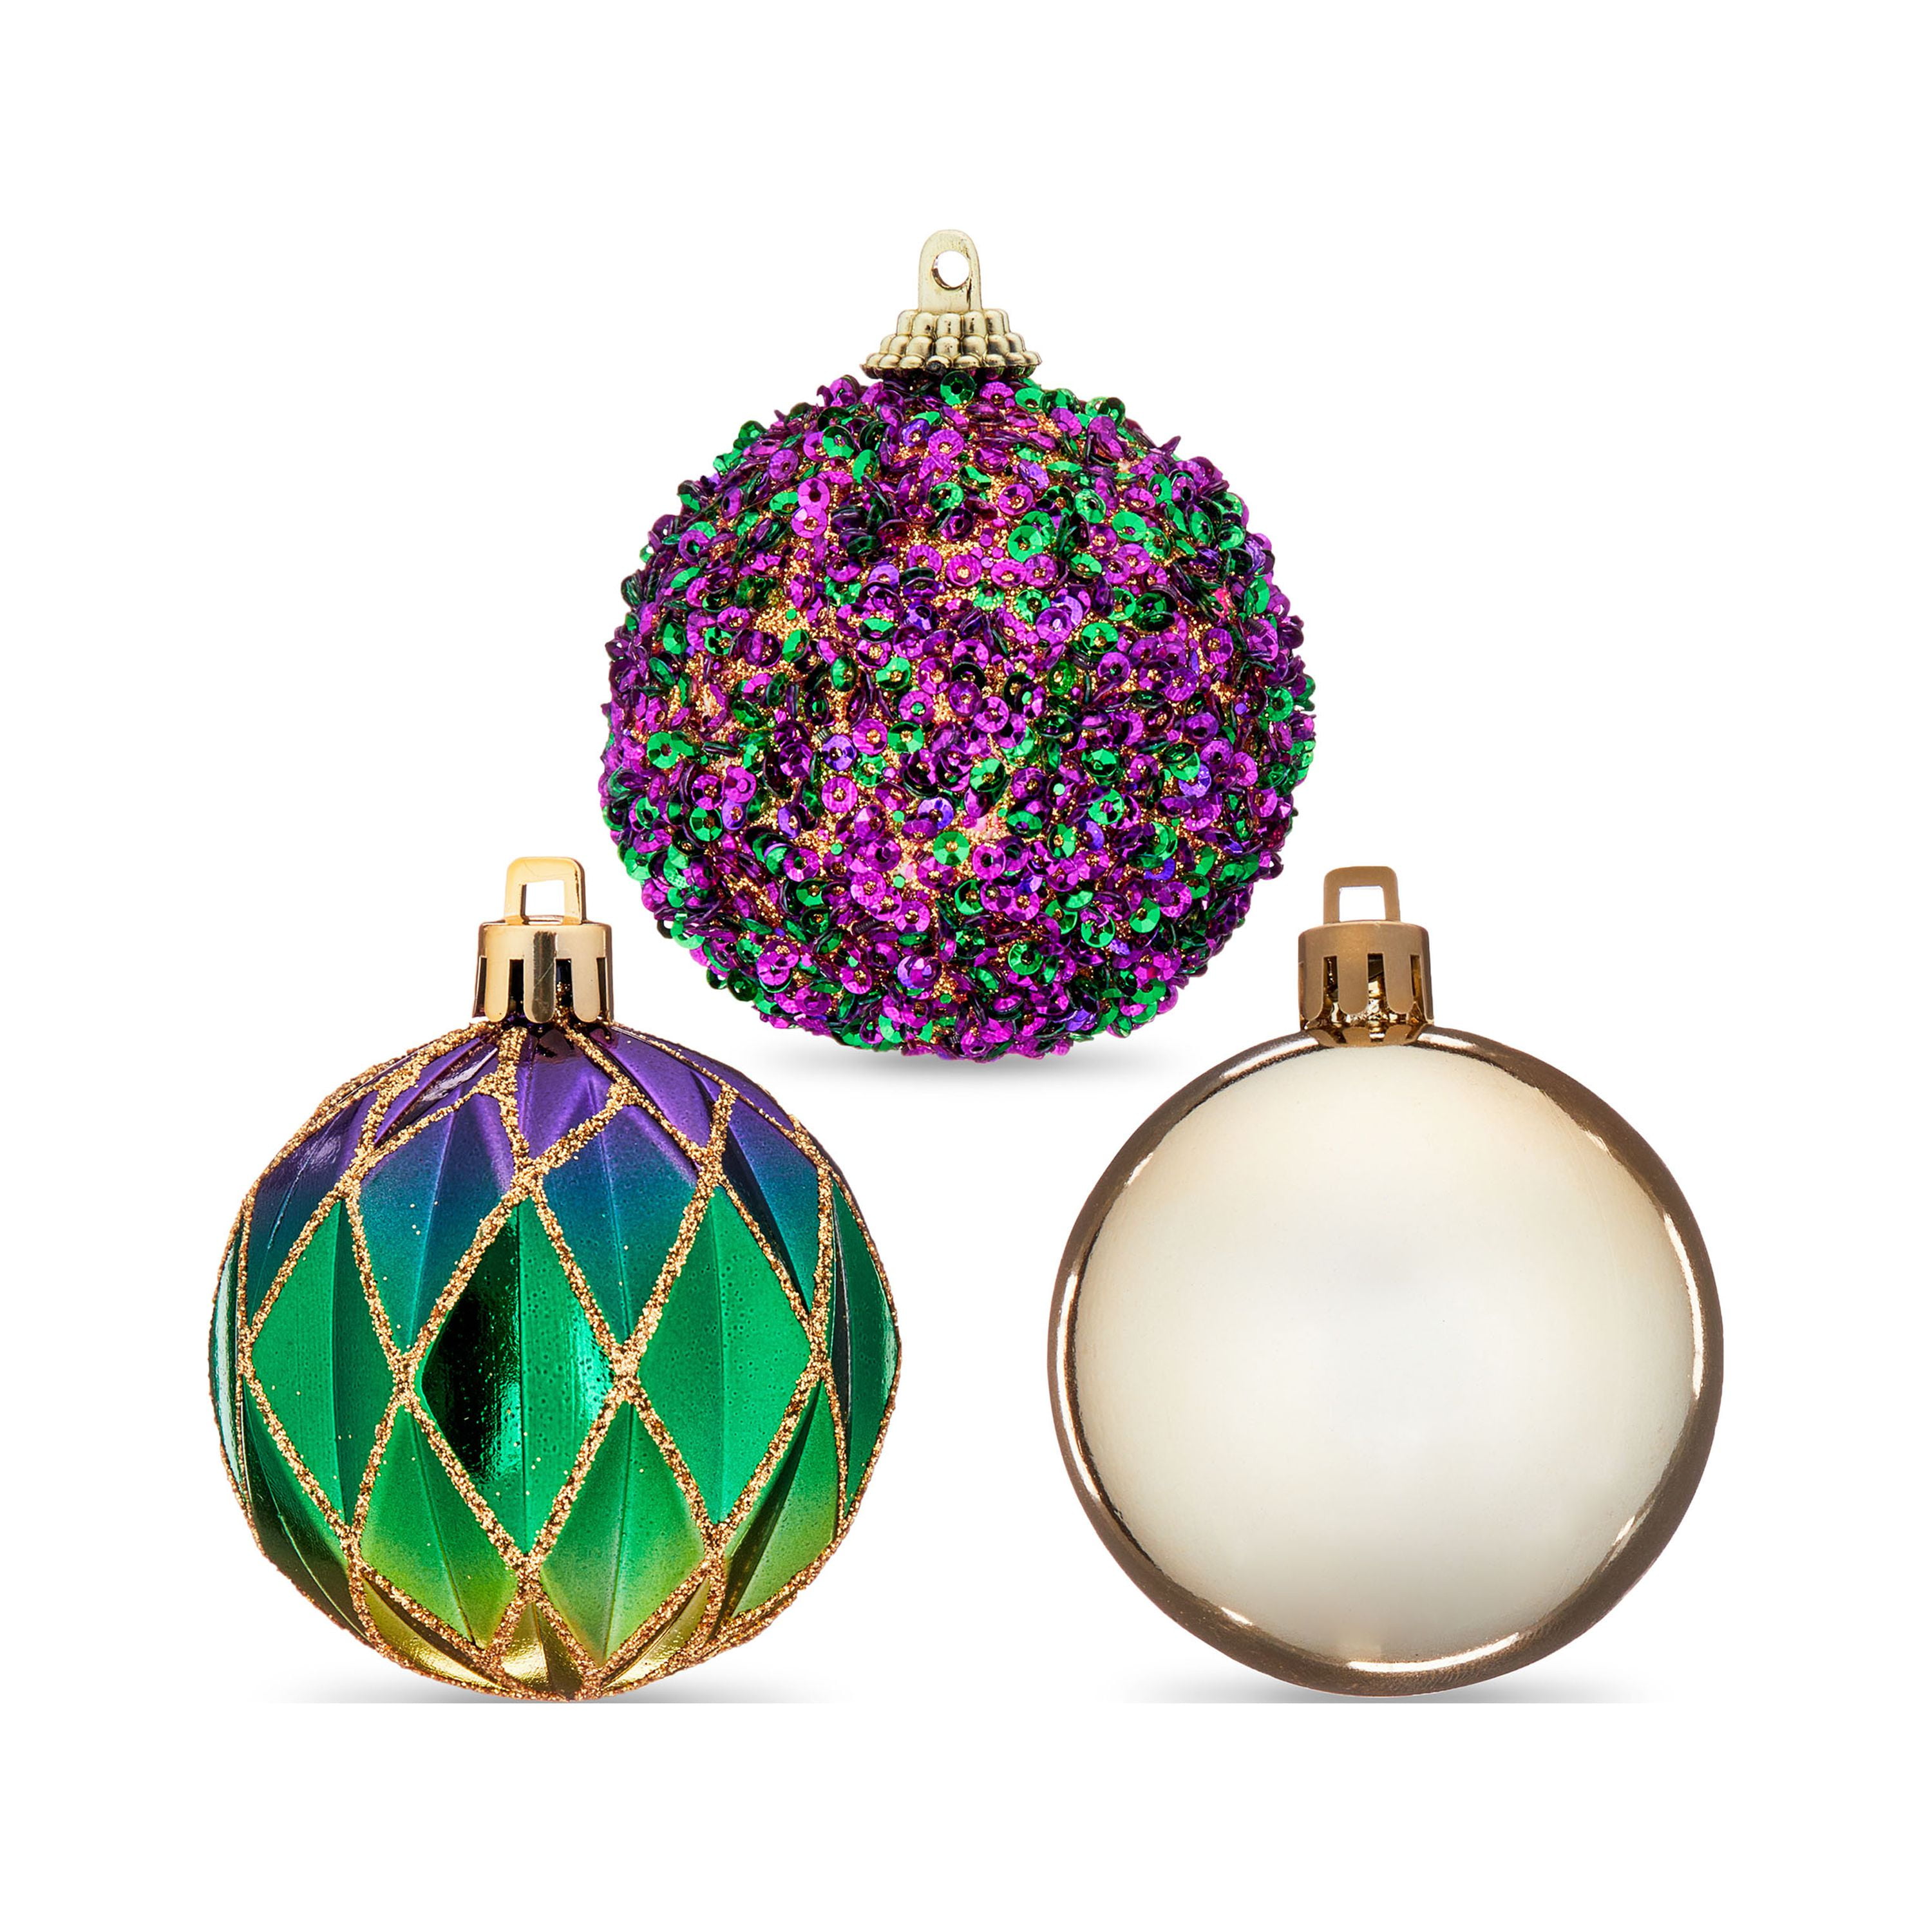 mardi gras ornaments products for sale